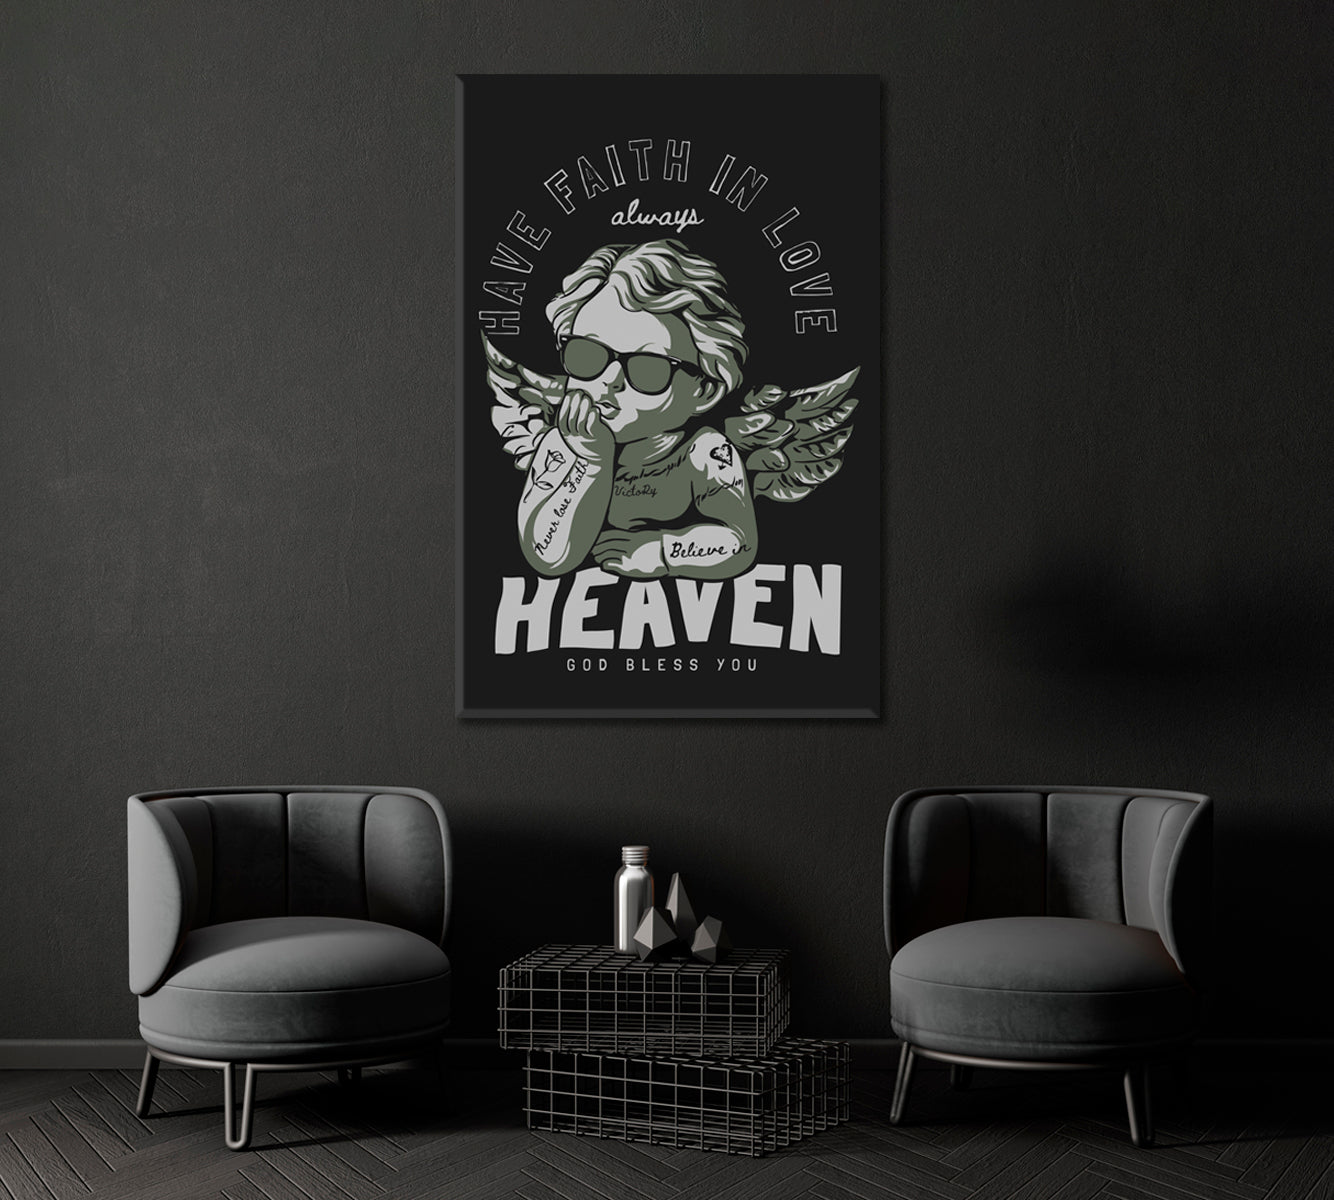 Believe in Heaven Canvas Print ArtLexy 1 Panel 16"x24" inches 